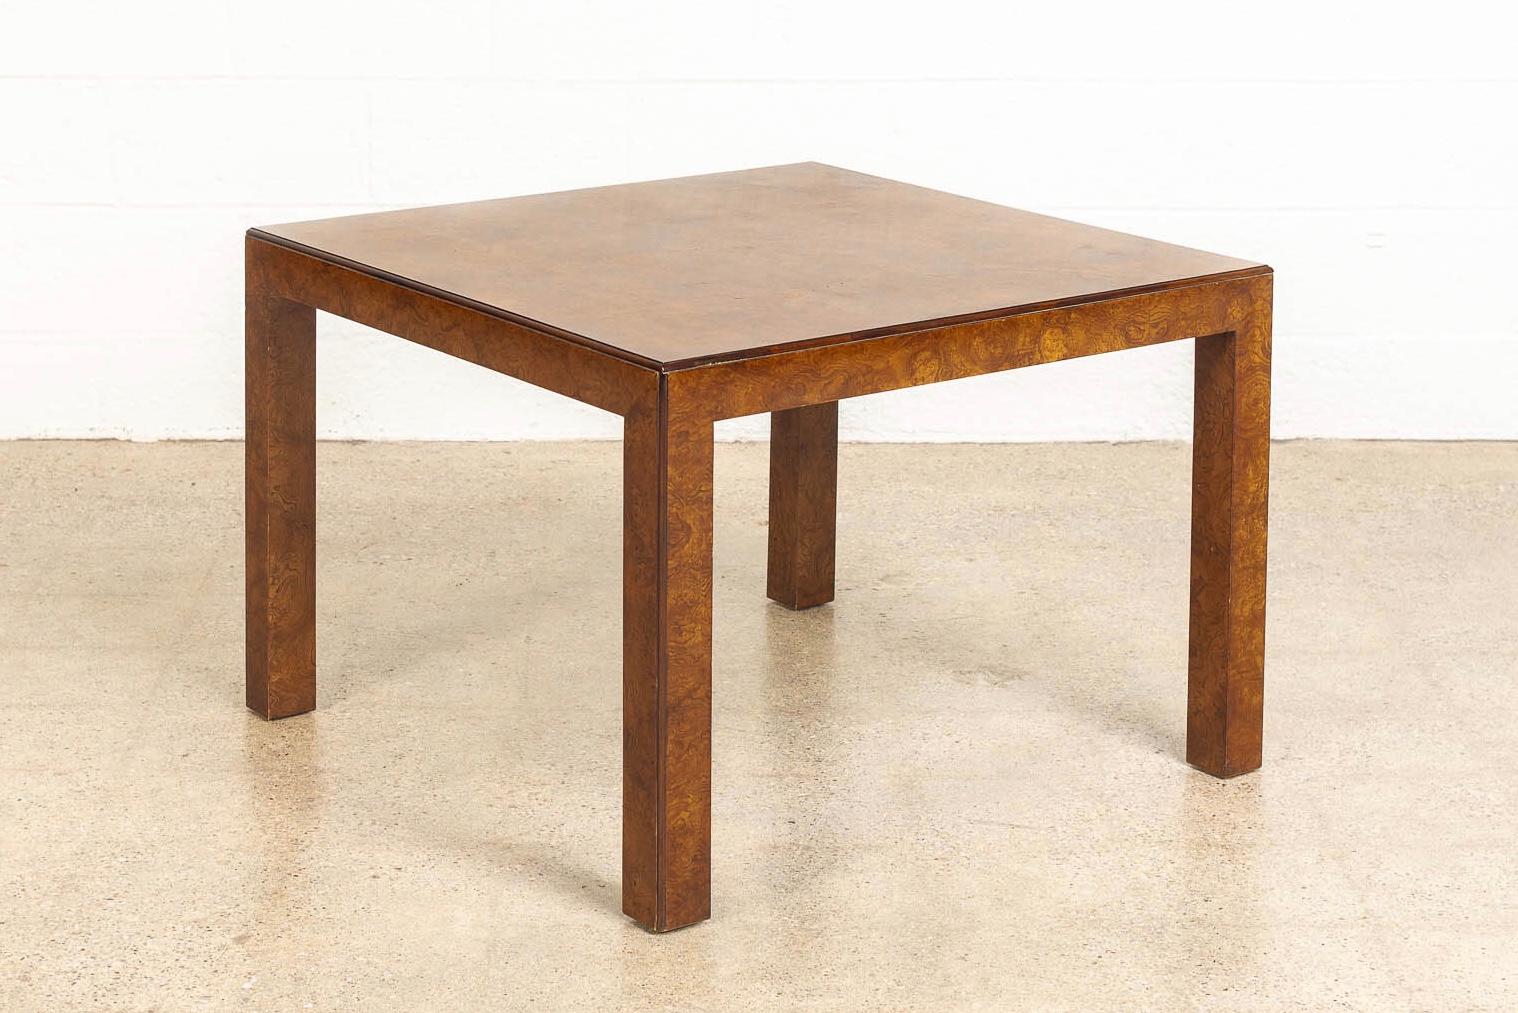 American Midcentury John Widdicomb Square Burl Wood Coffee Table Side Table, 1970s For Sale